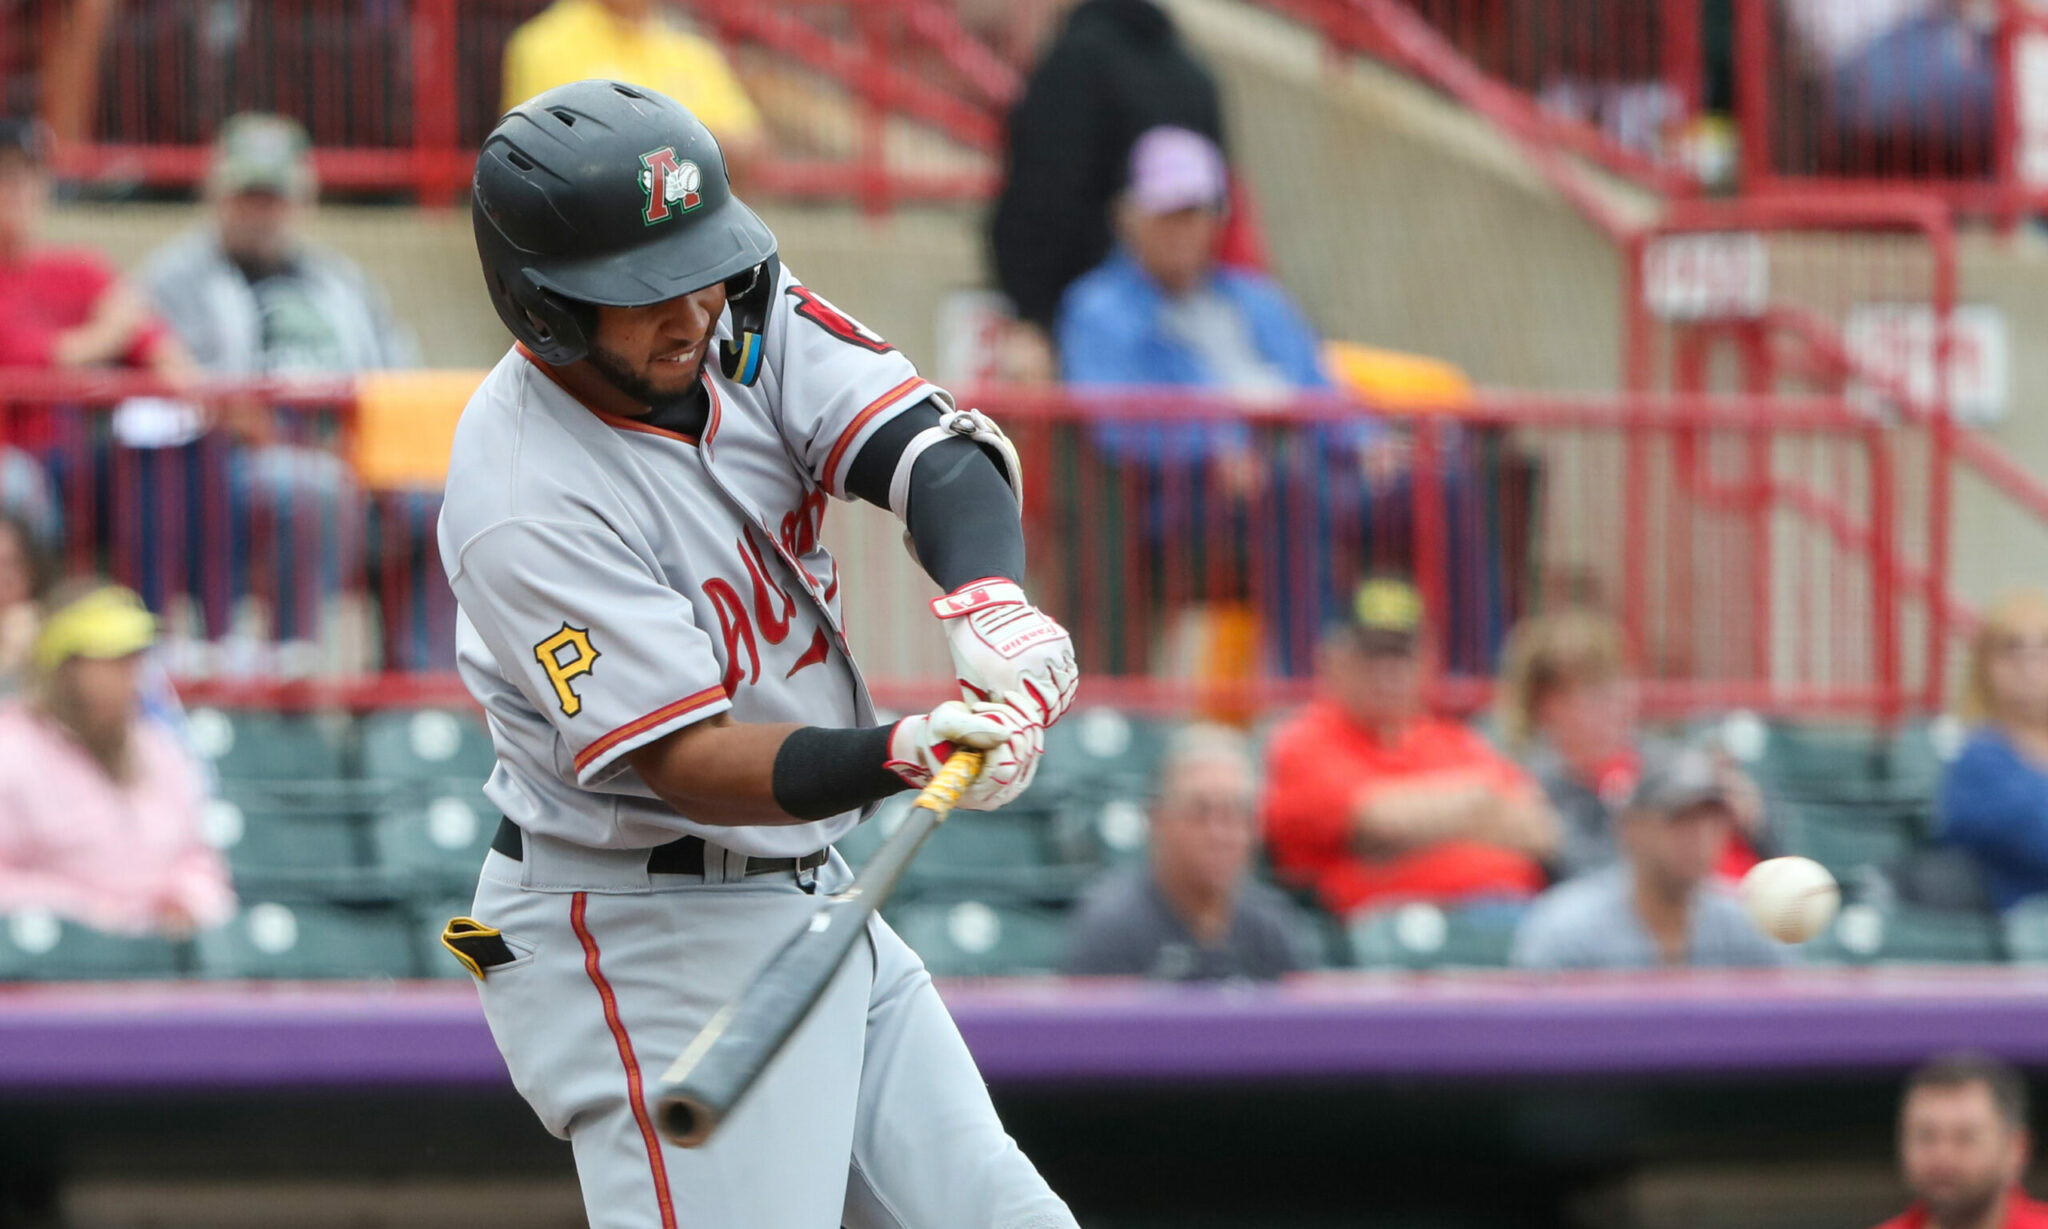 Pirates Prospects Daily: Best Contact Hitters In the Pirates System For 2022